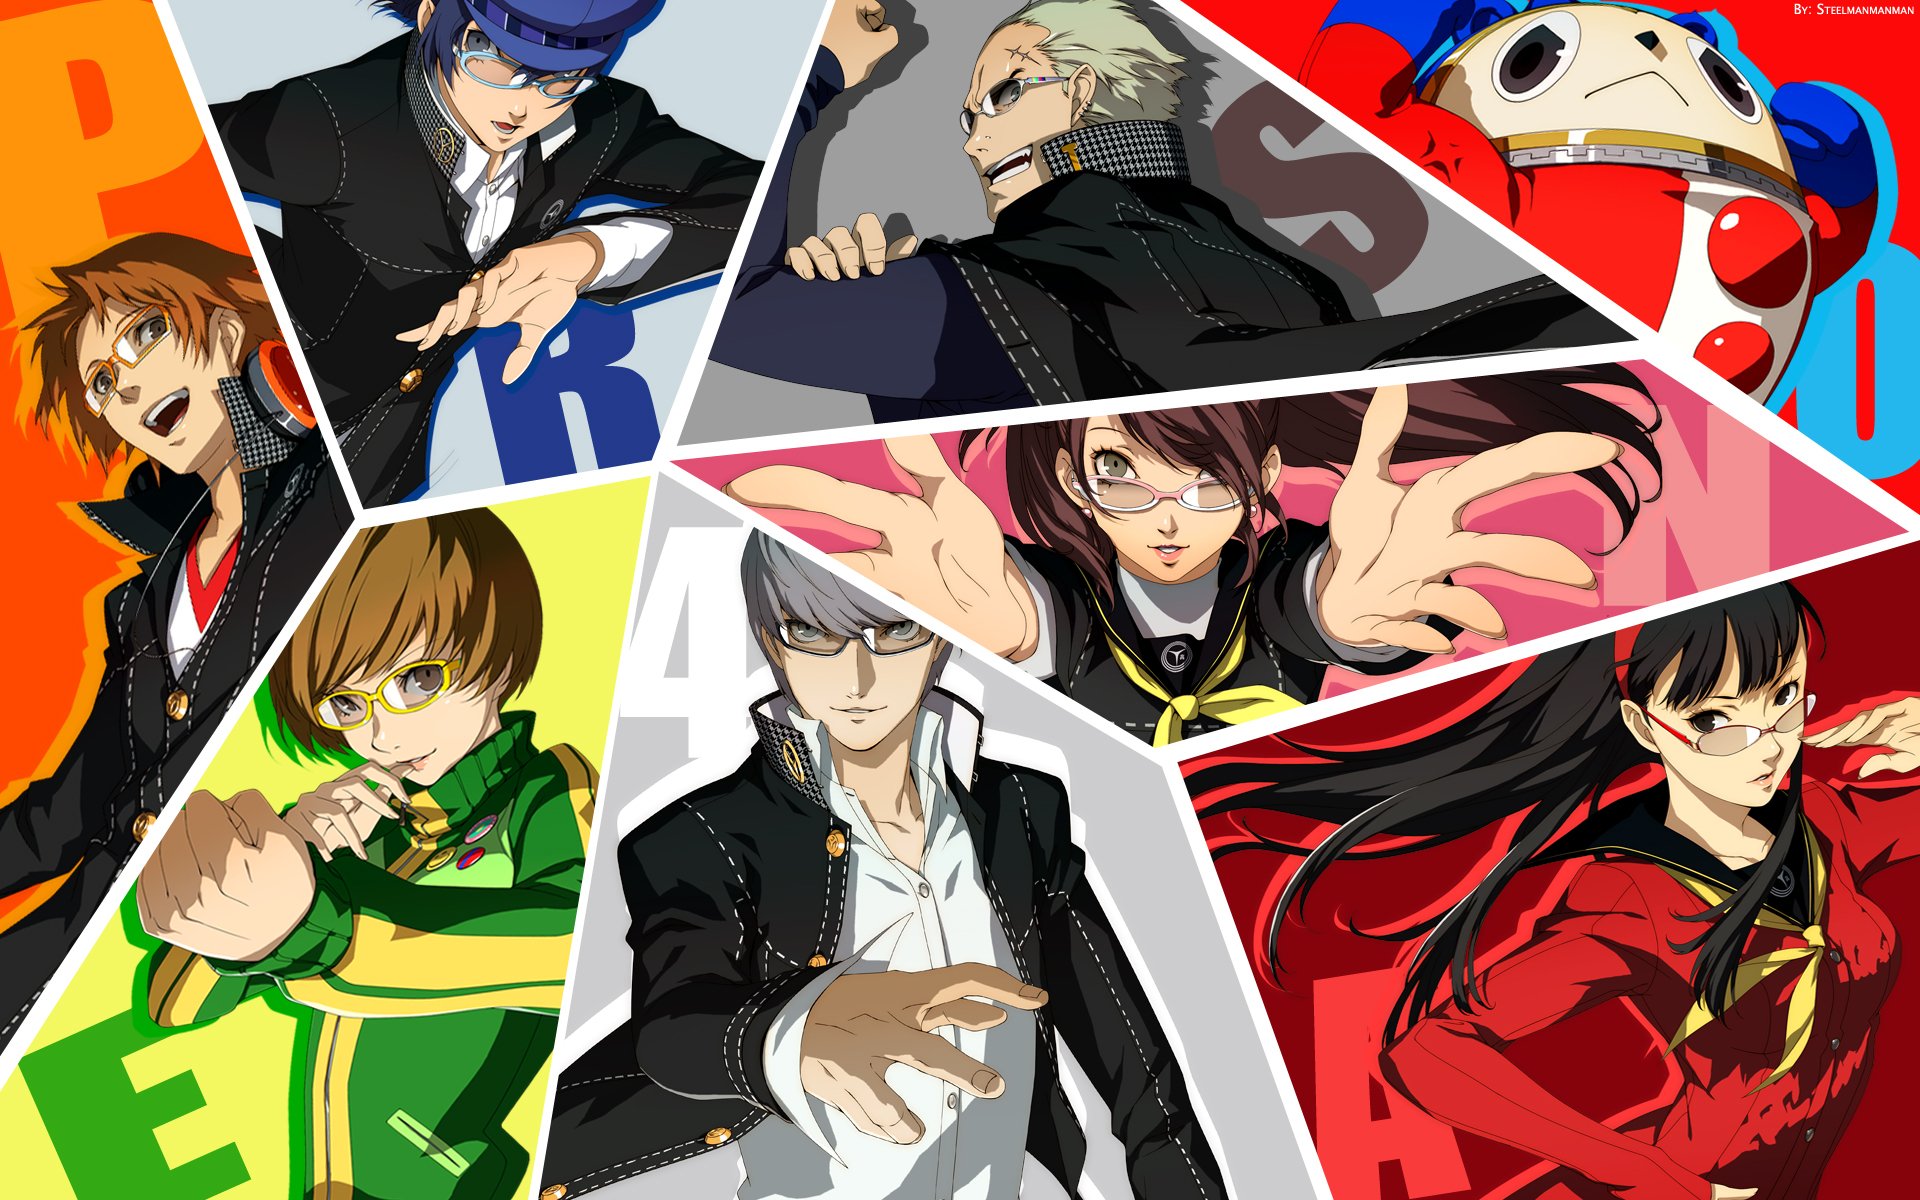 150 Persona 4 Hd Wallpapers Background Images